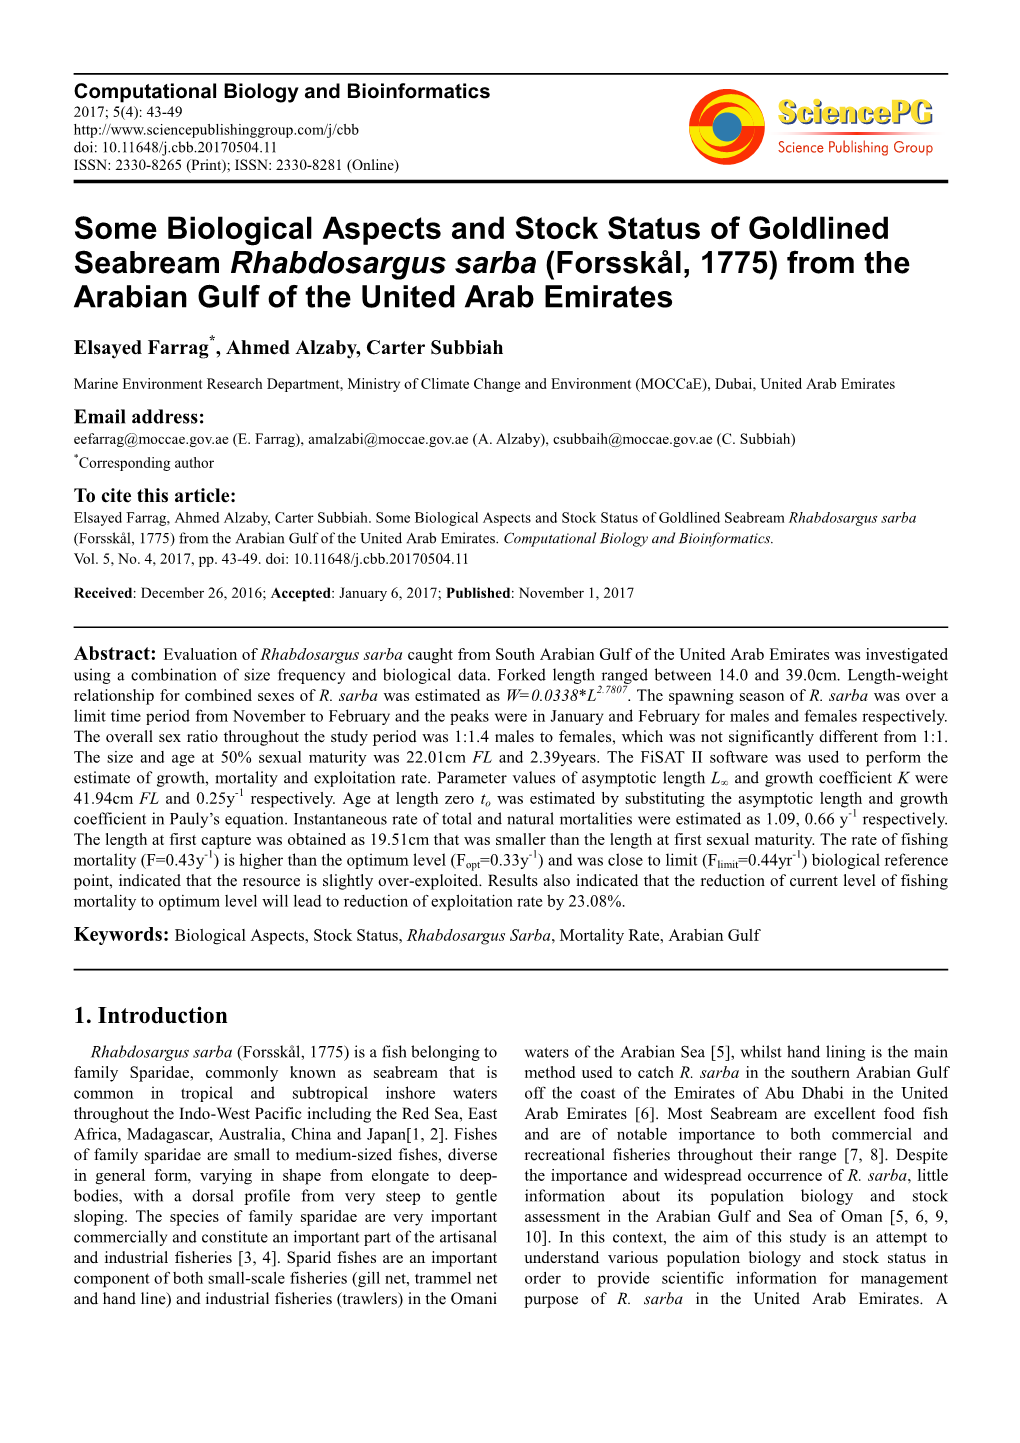 Some Biological Aspects and Stock Status of Goldlined Seabream Rhabdosargus Sarba (Forsskål, 1775) from the Arabian Gulf of the United Arab Emirates